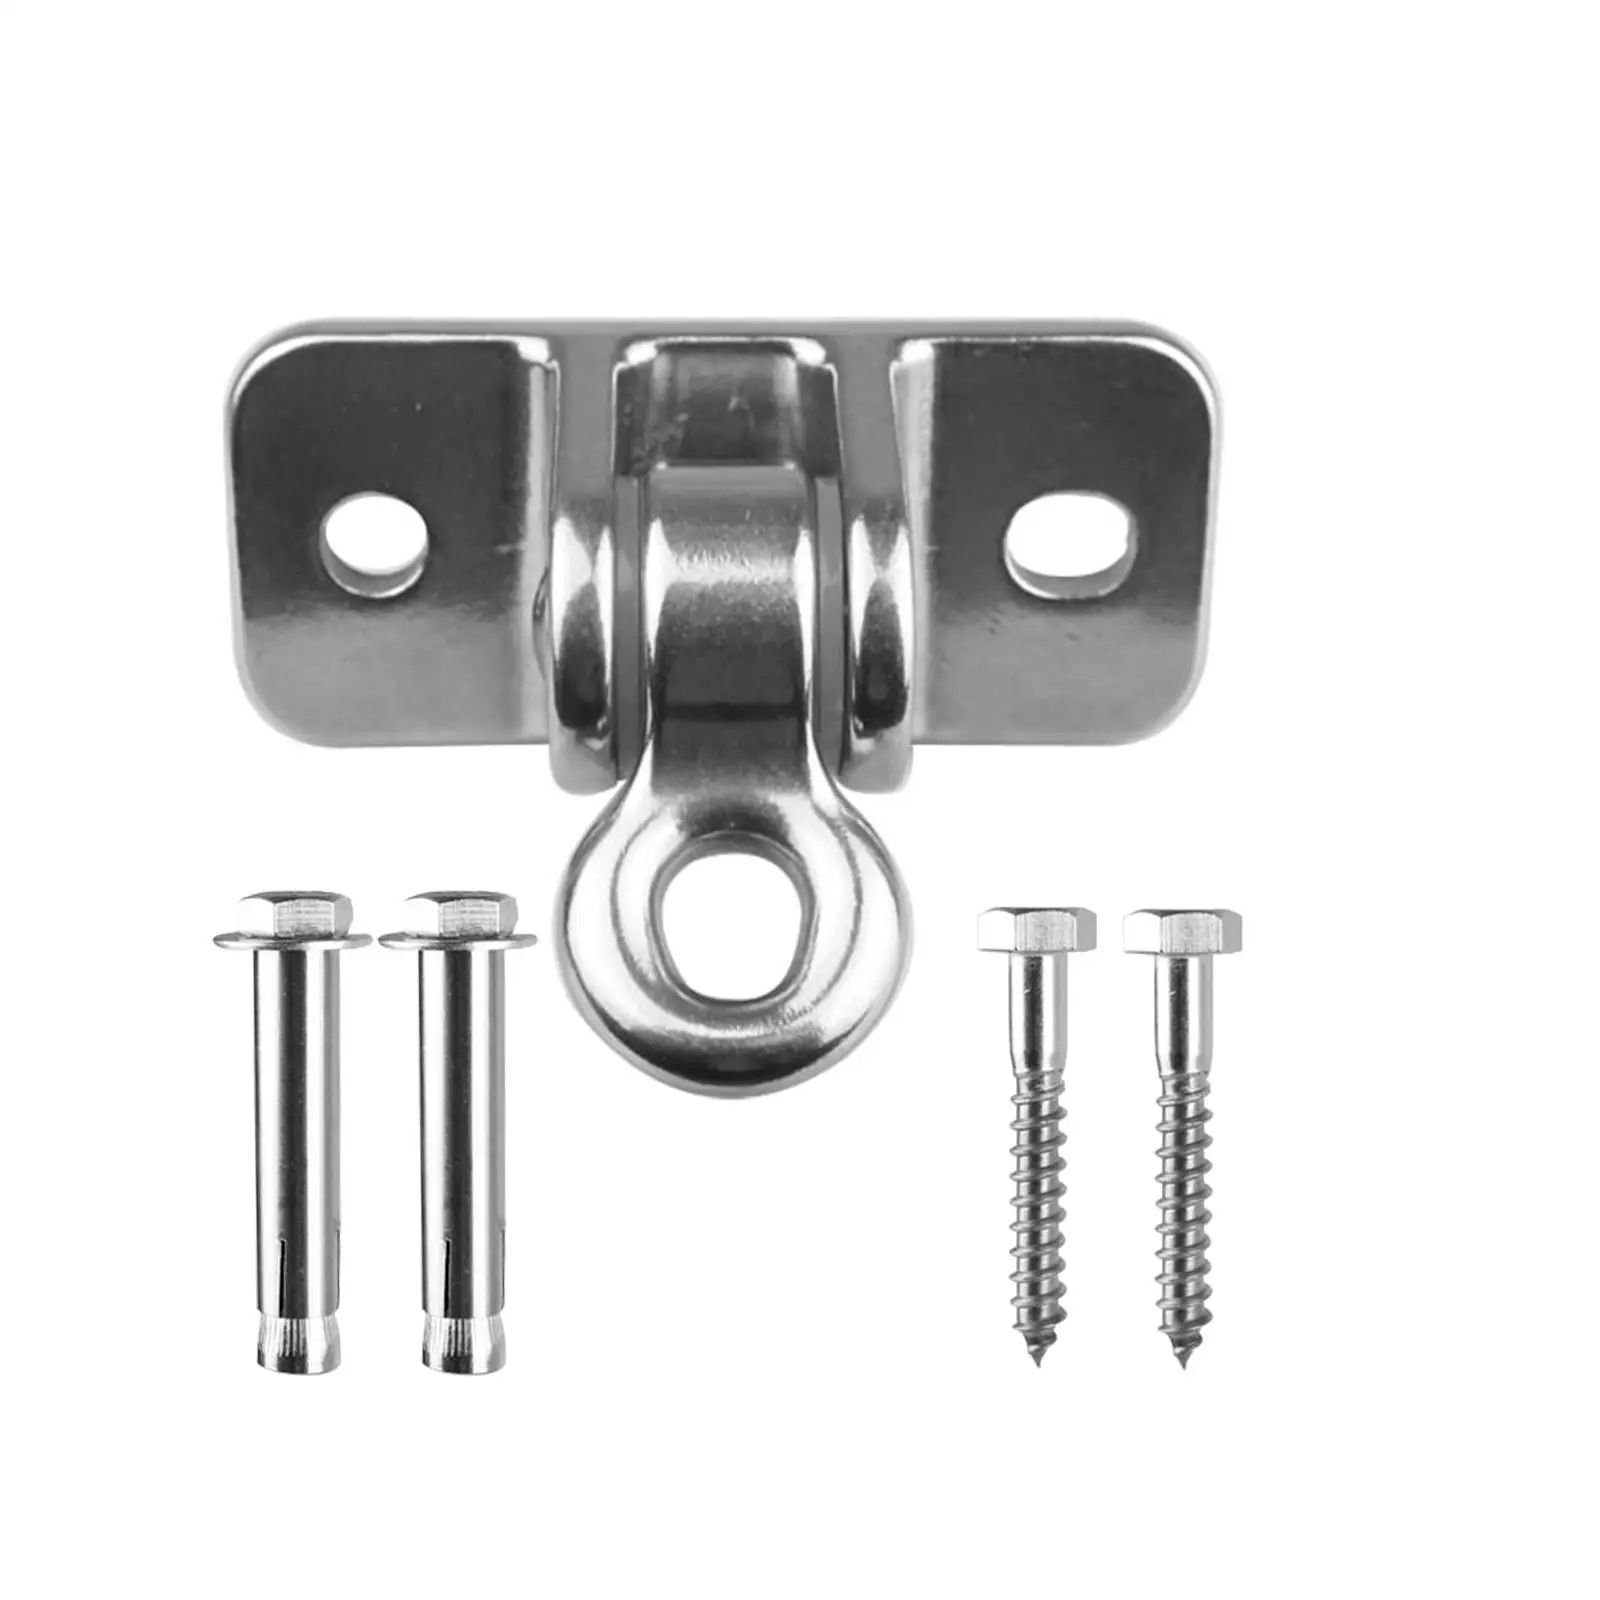 Swing Hanger Buckle Stainless Steel Hardware Mounting Screws for Porch Swing Hammock Chair Heavy Bag Yoga Gymnastic Rings